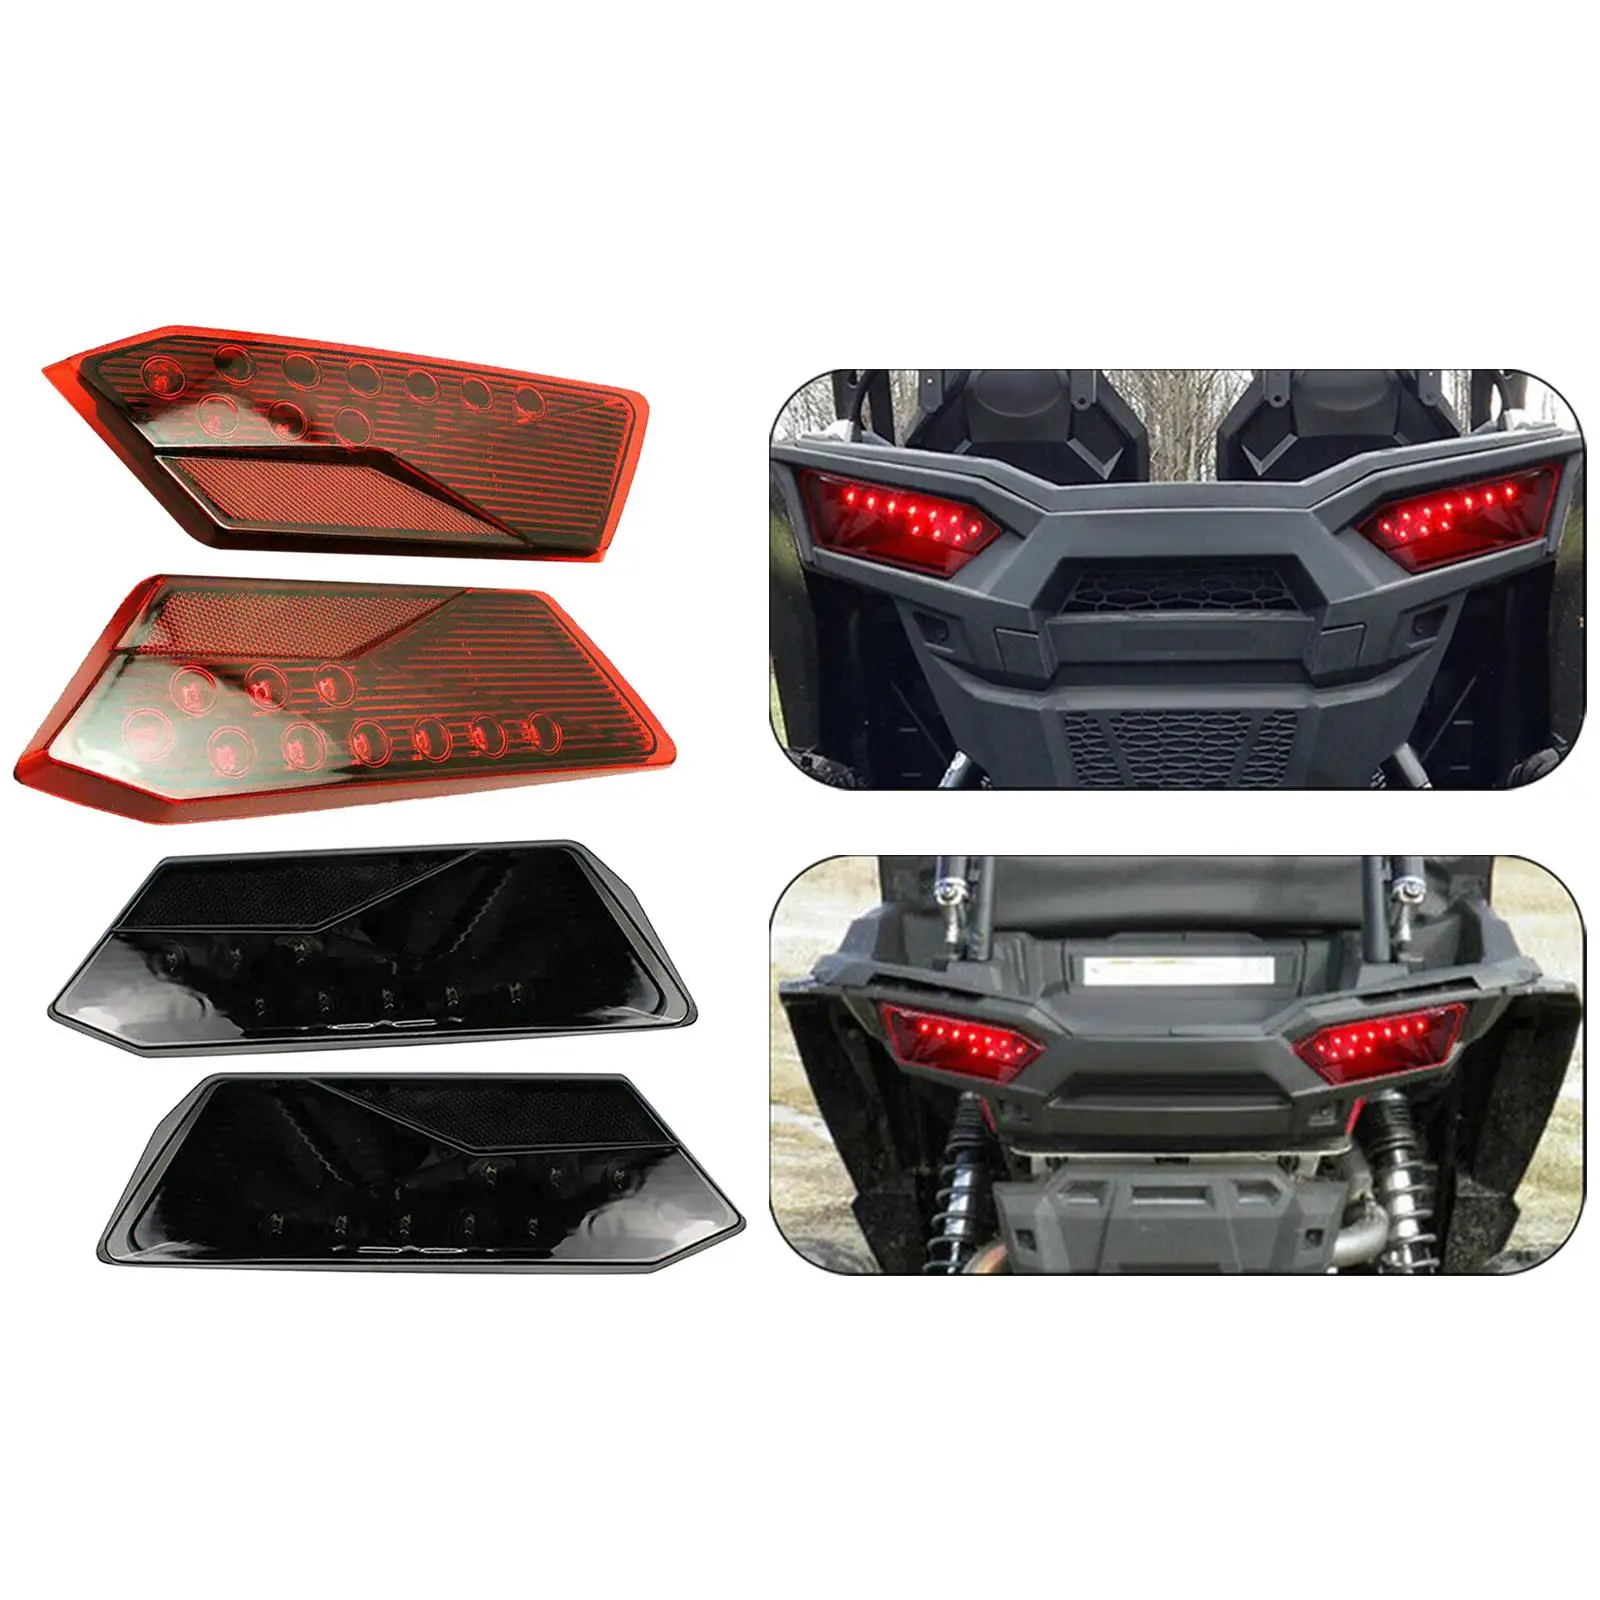 2Pcs Tail Lights Accessories Driving Lights Rear Brake Stop Lights Tail Lamps Fit for Polaris RZR 2412341 2412342 Replaces